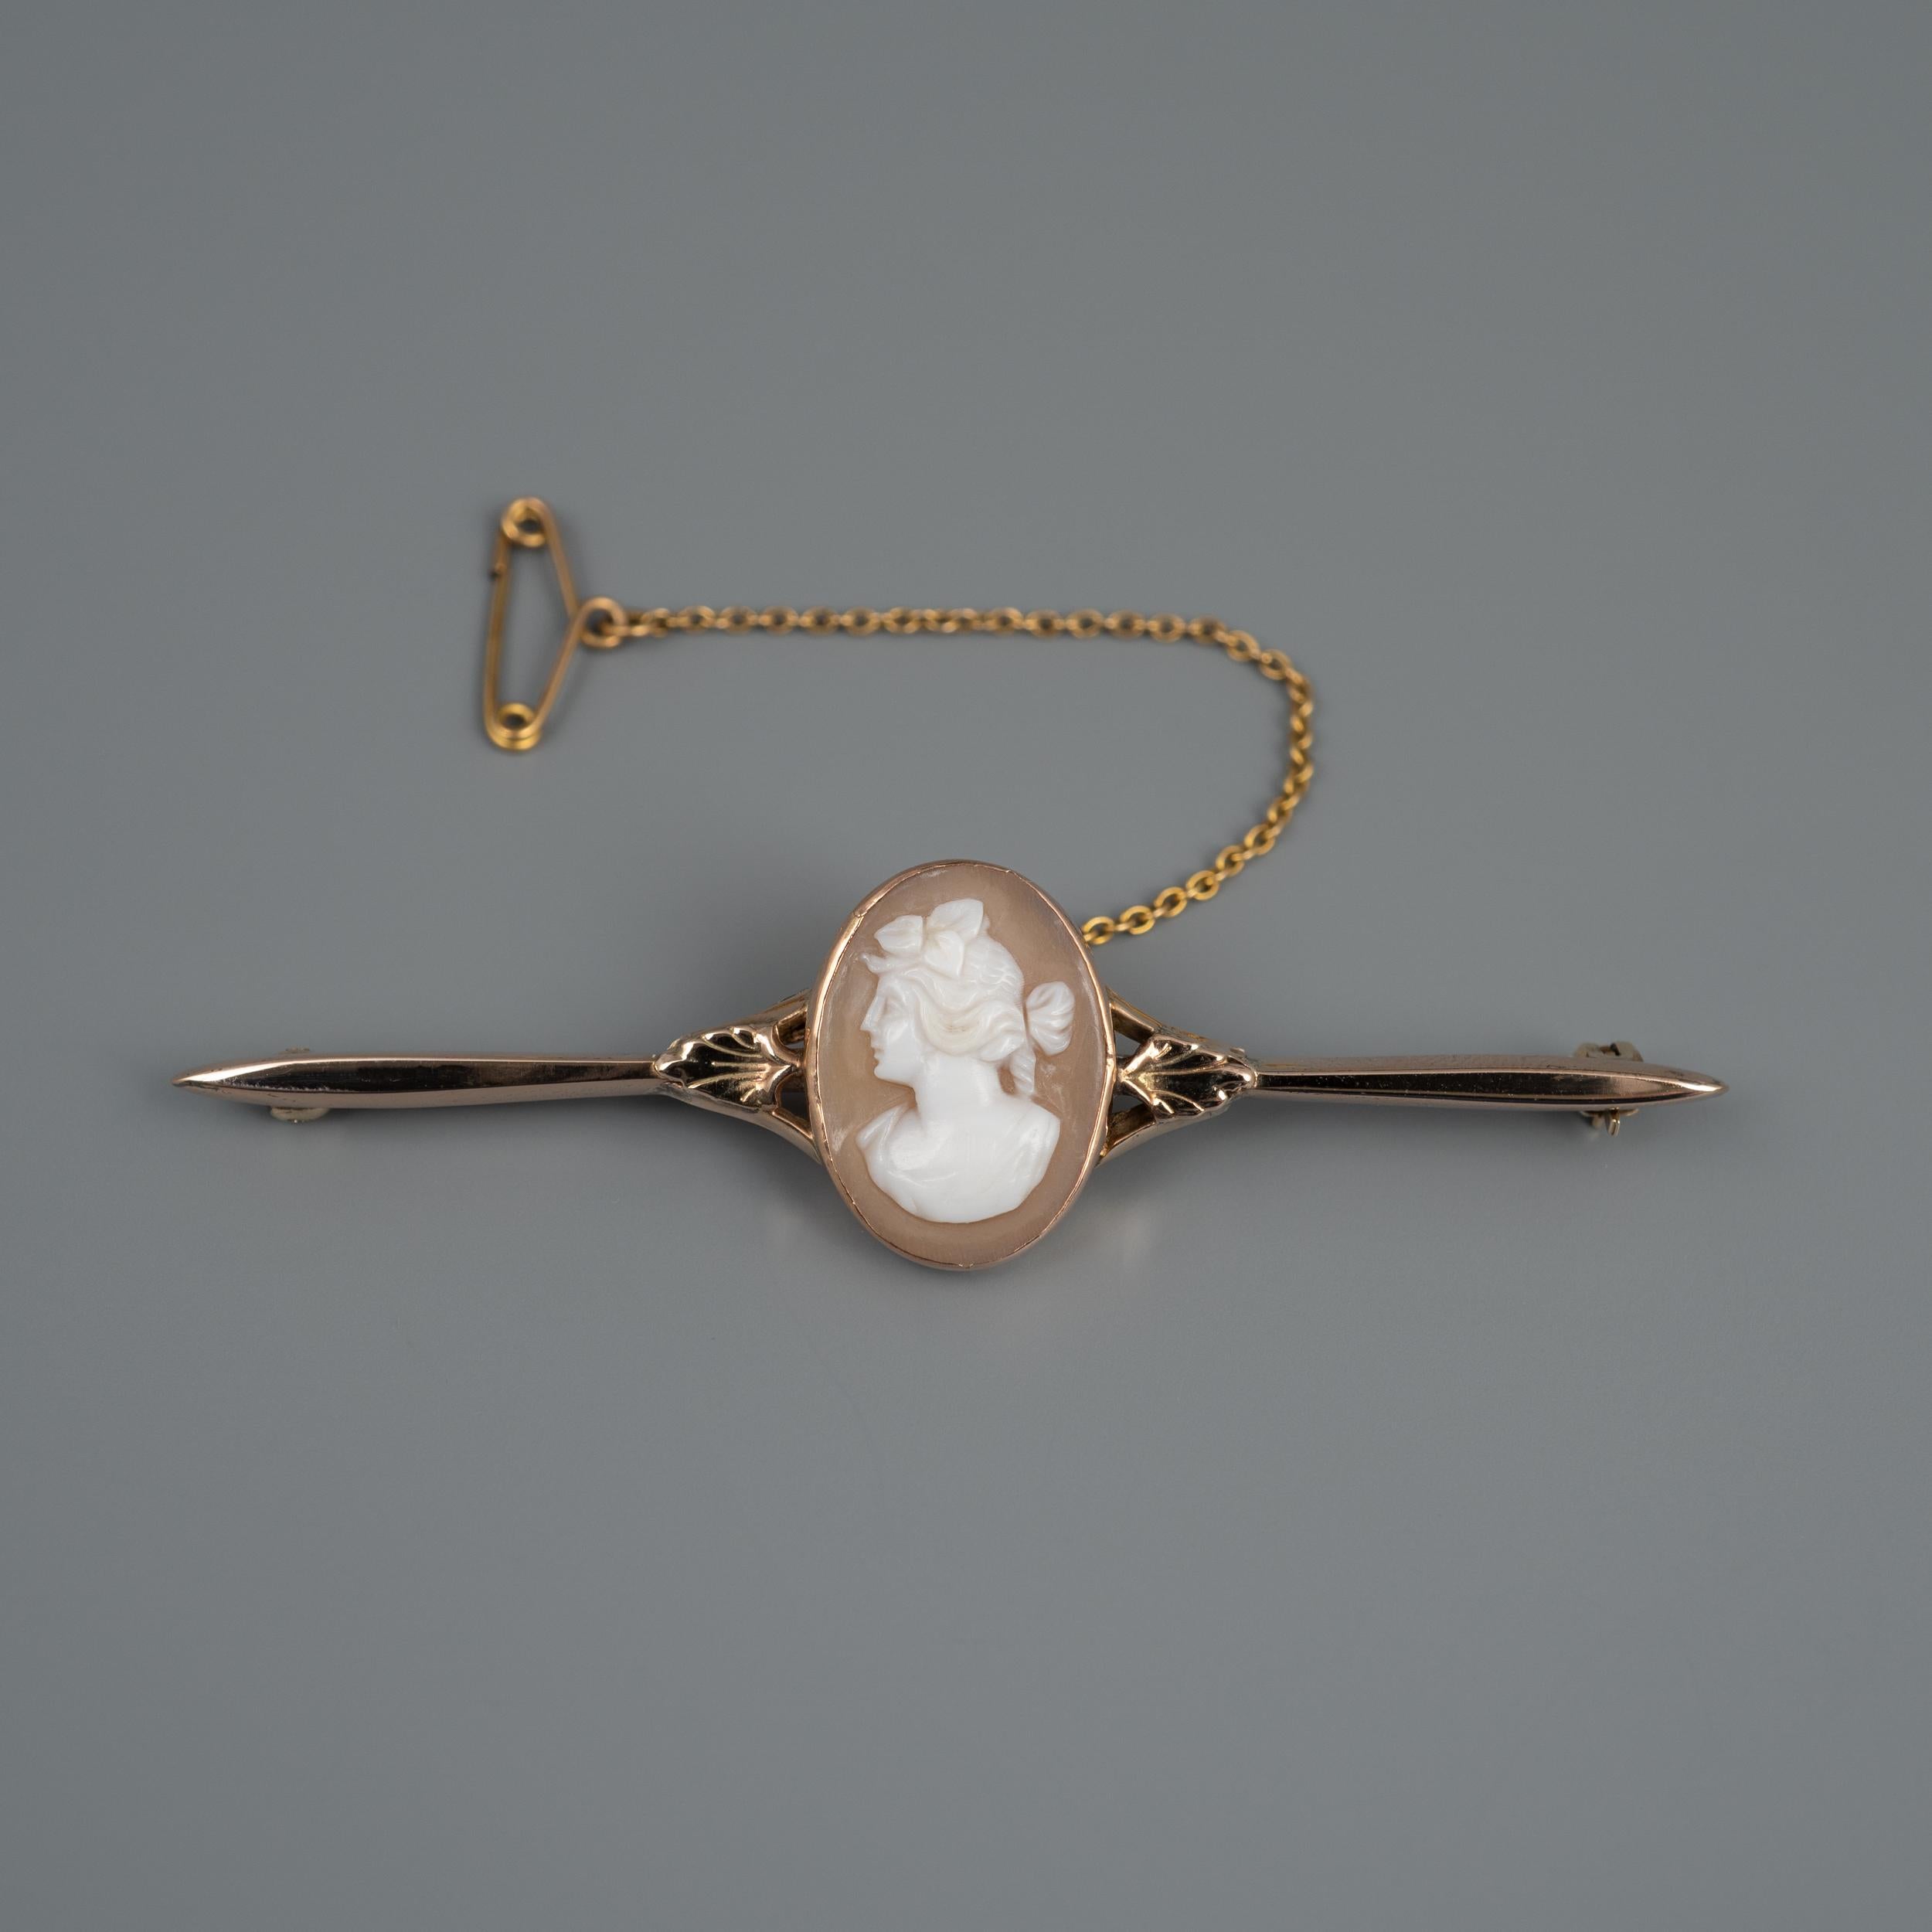 This vintage rose gold bar brooch features a center oval cameo with female portrait carved from sardonyx shell and set in an oval mount which has fantastic gold leaf detail on either side. The bar has an elegant graduated elongated eclipse shape